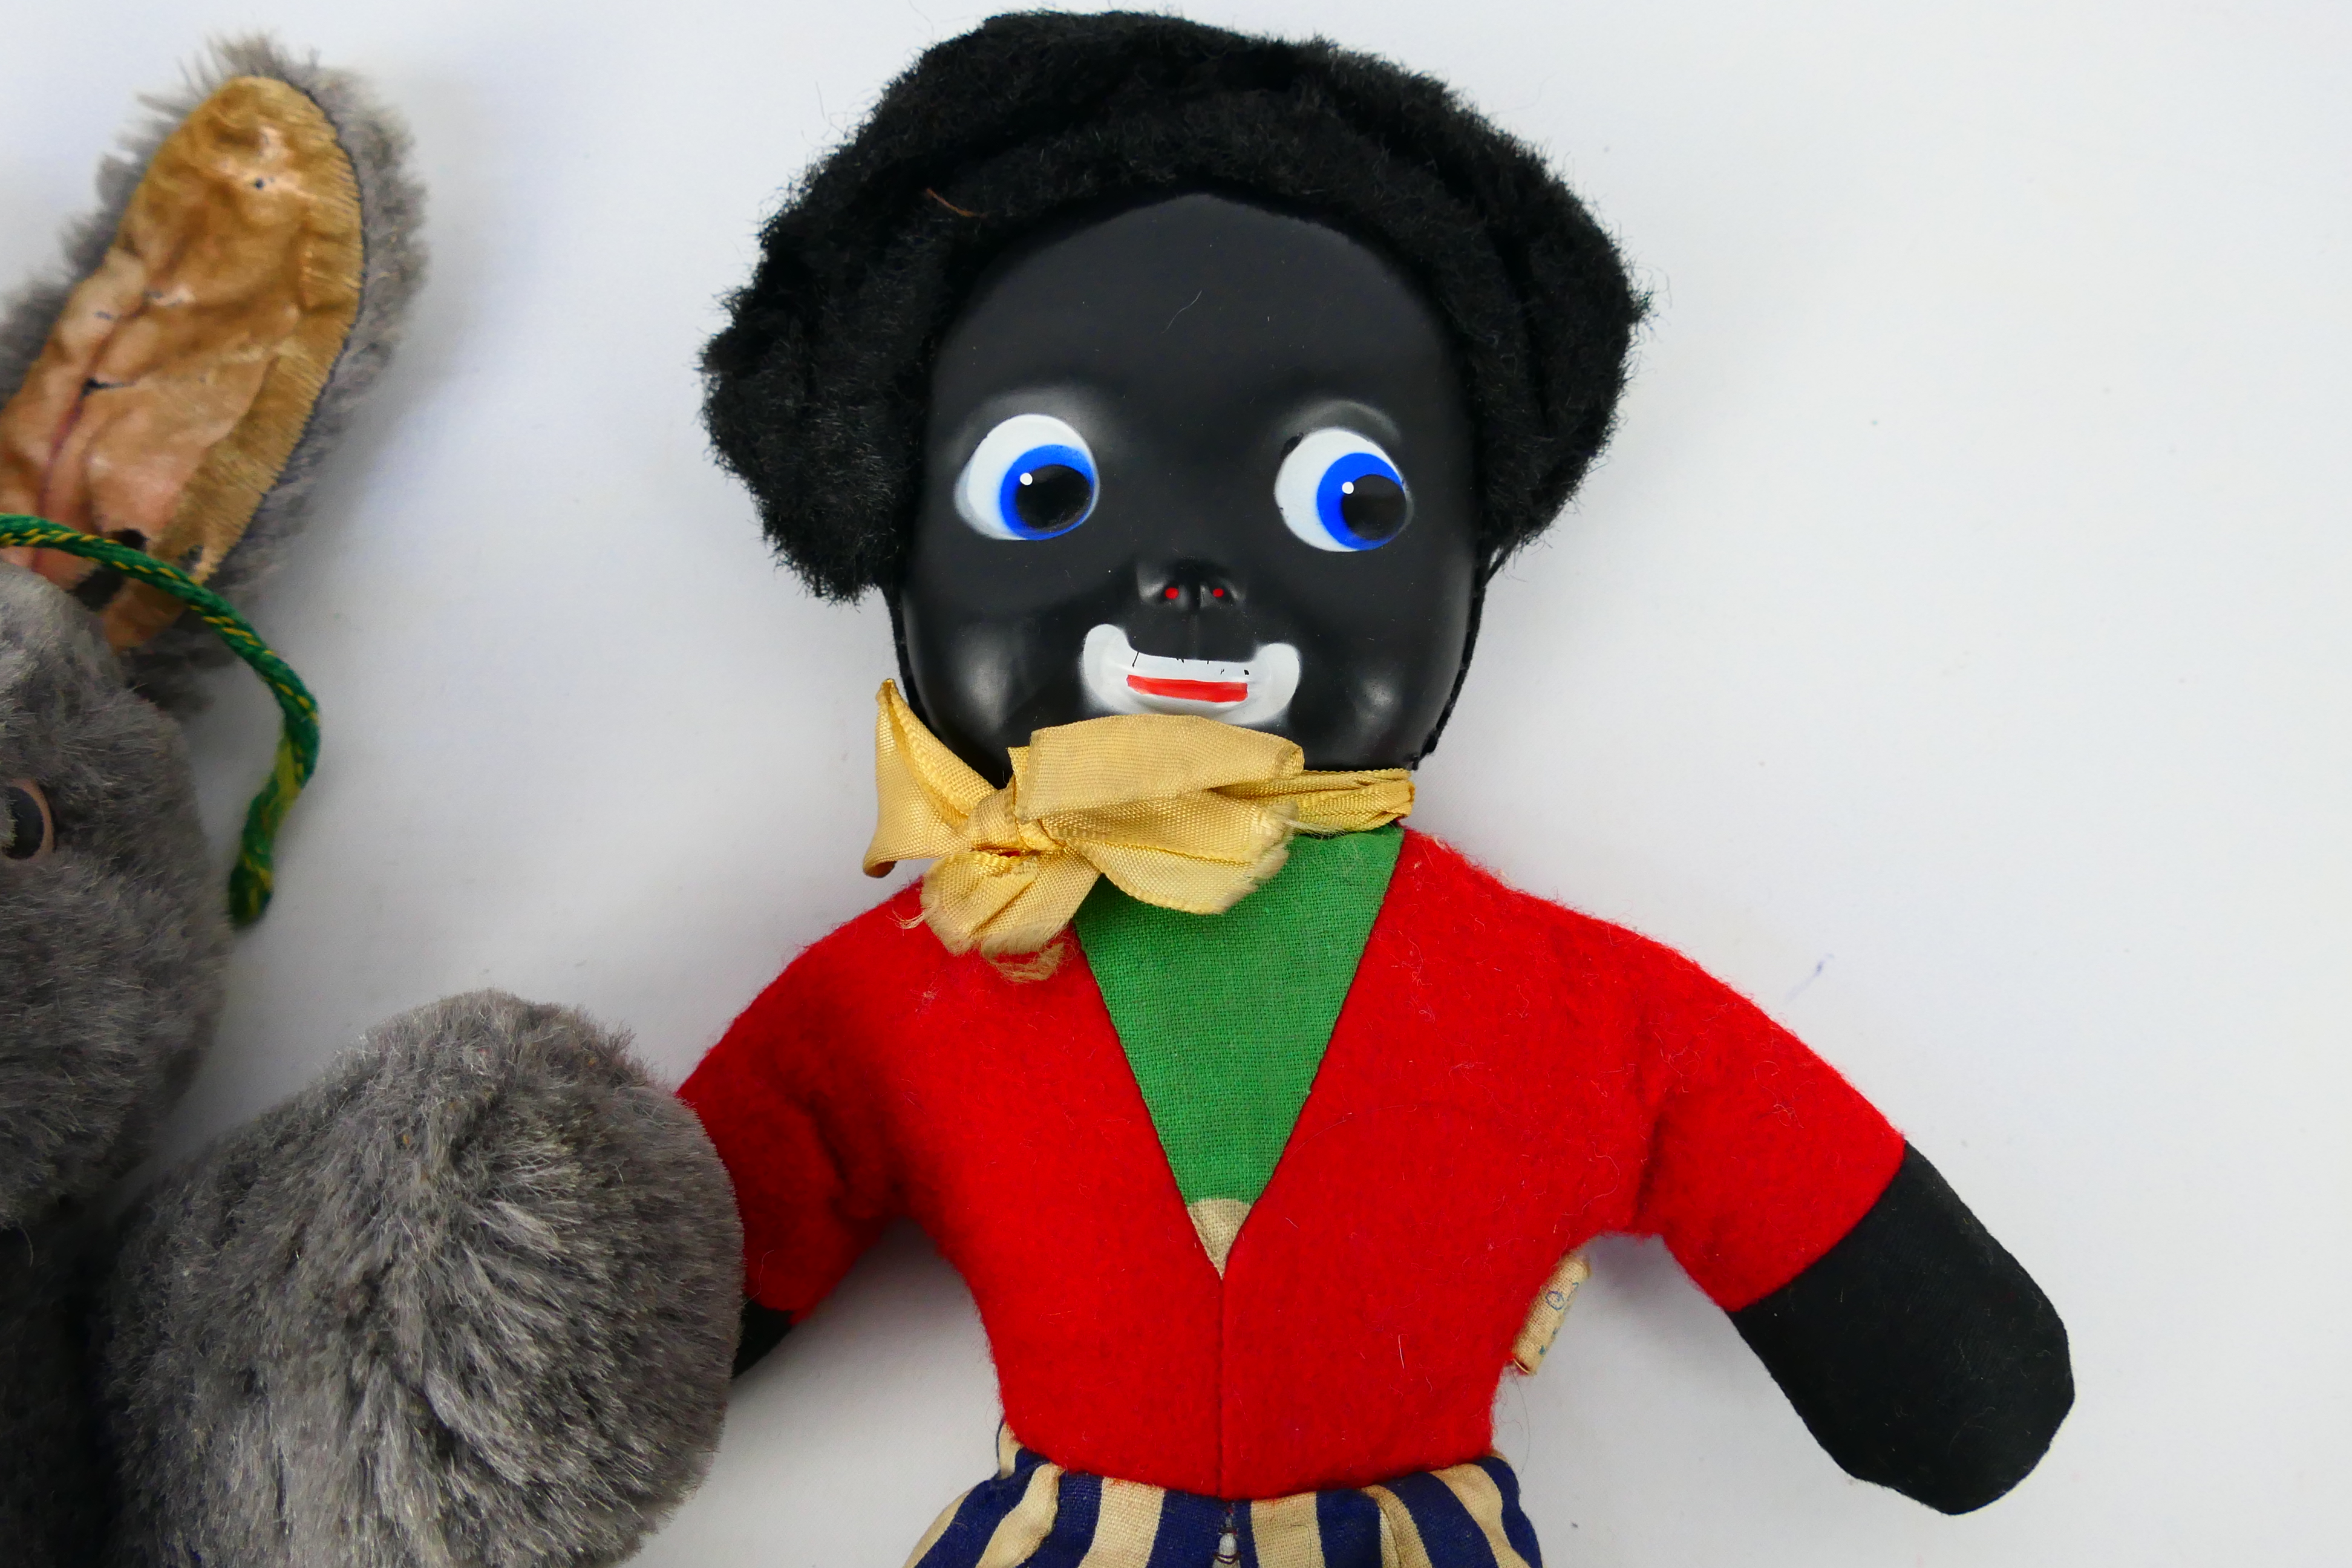 Pamela Foster - Chad Valley - Sooty - An unboxed Sooty Puppet, Golly and Bunny Plush. - Image 6 of 8